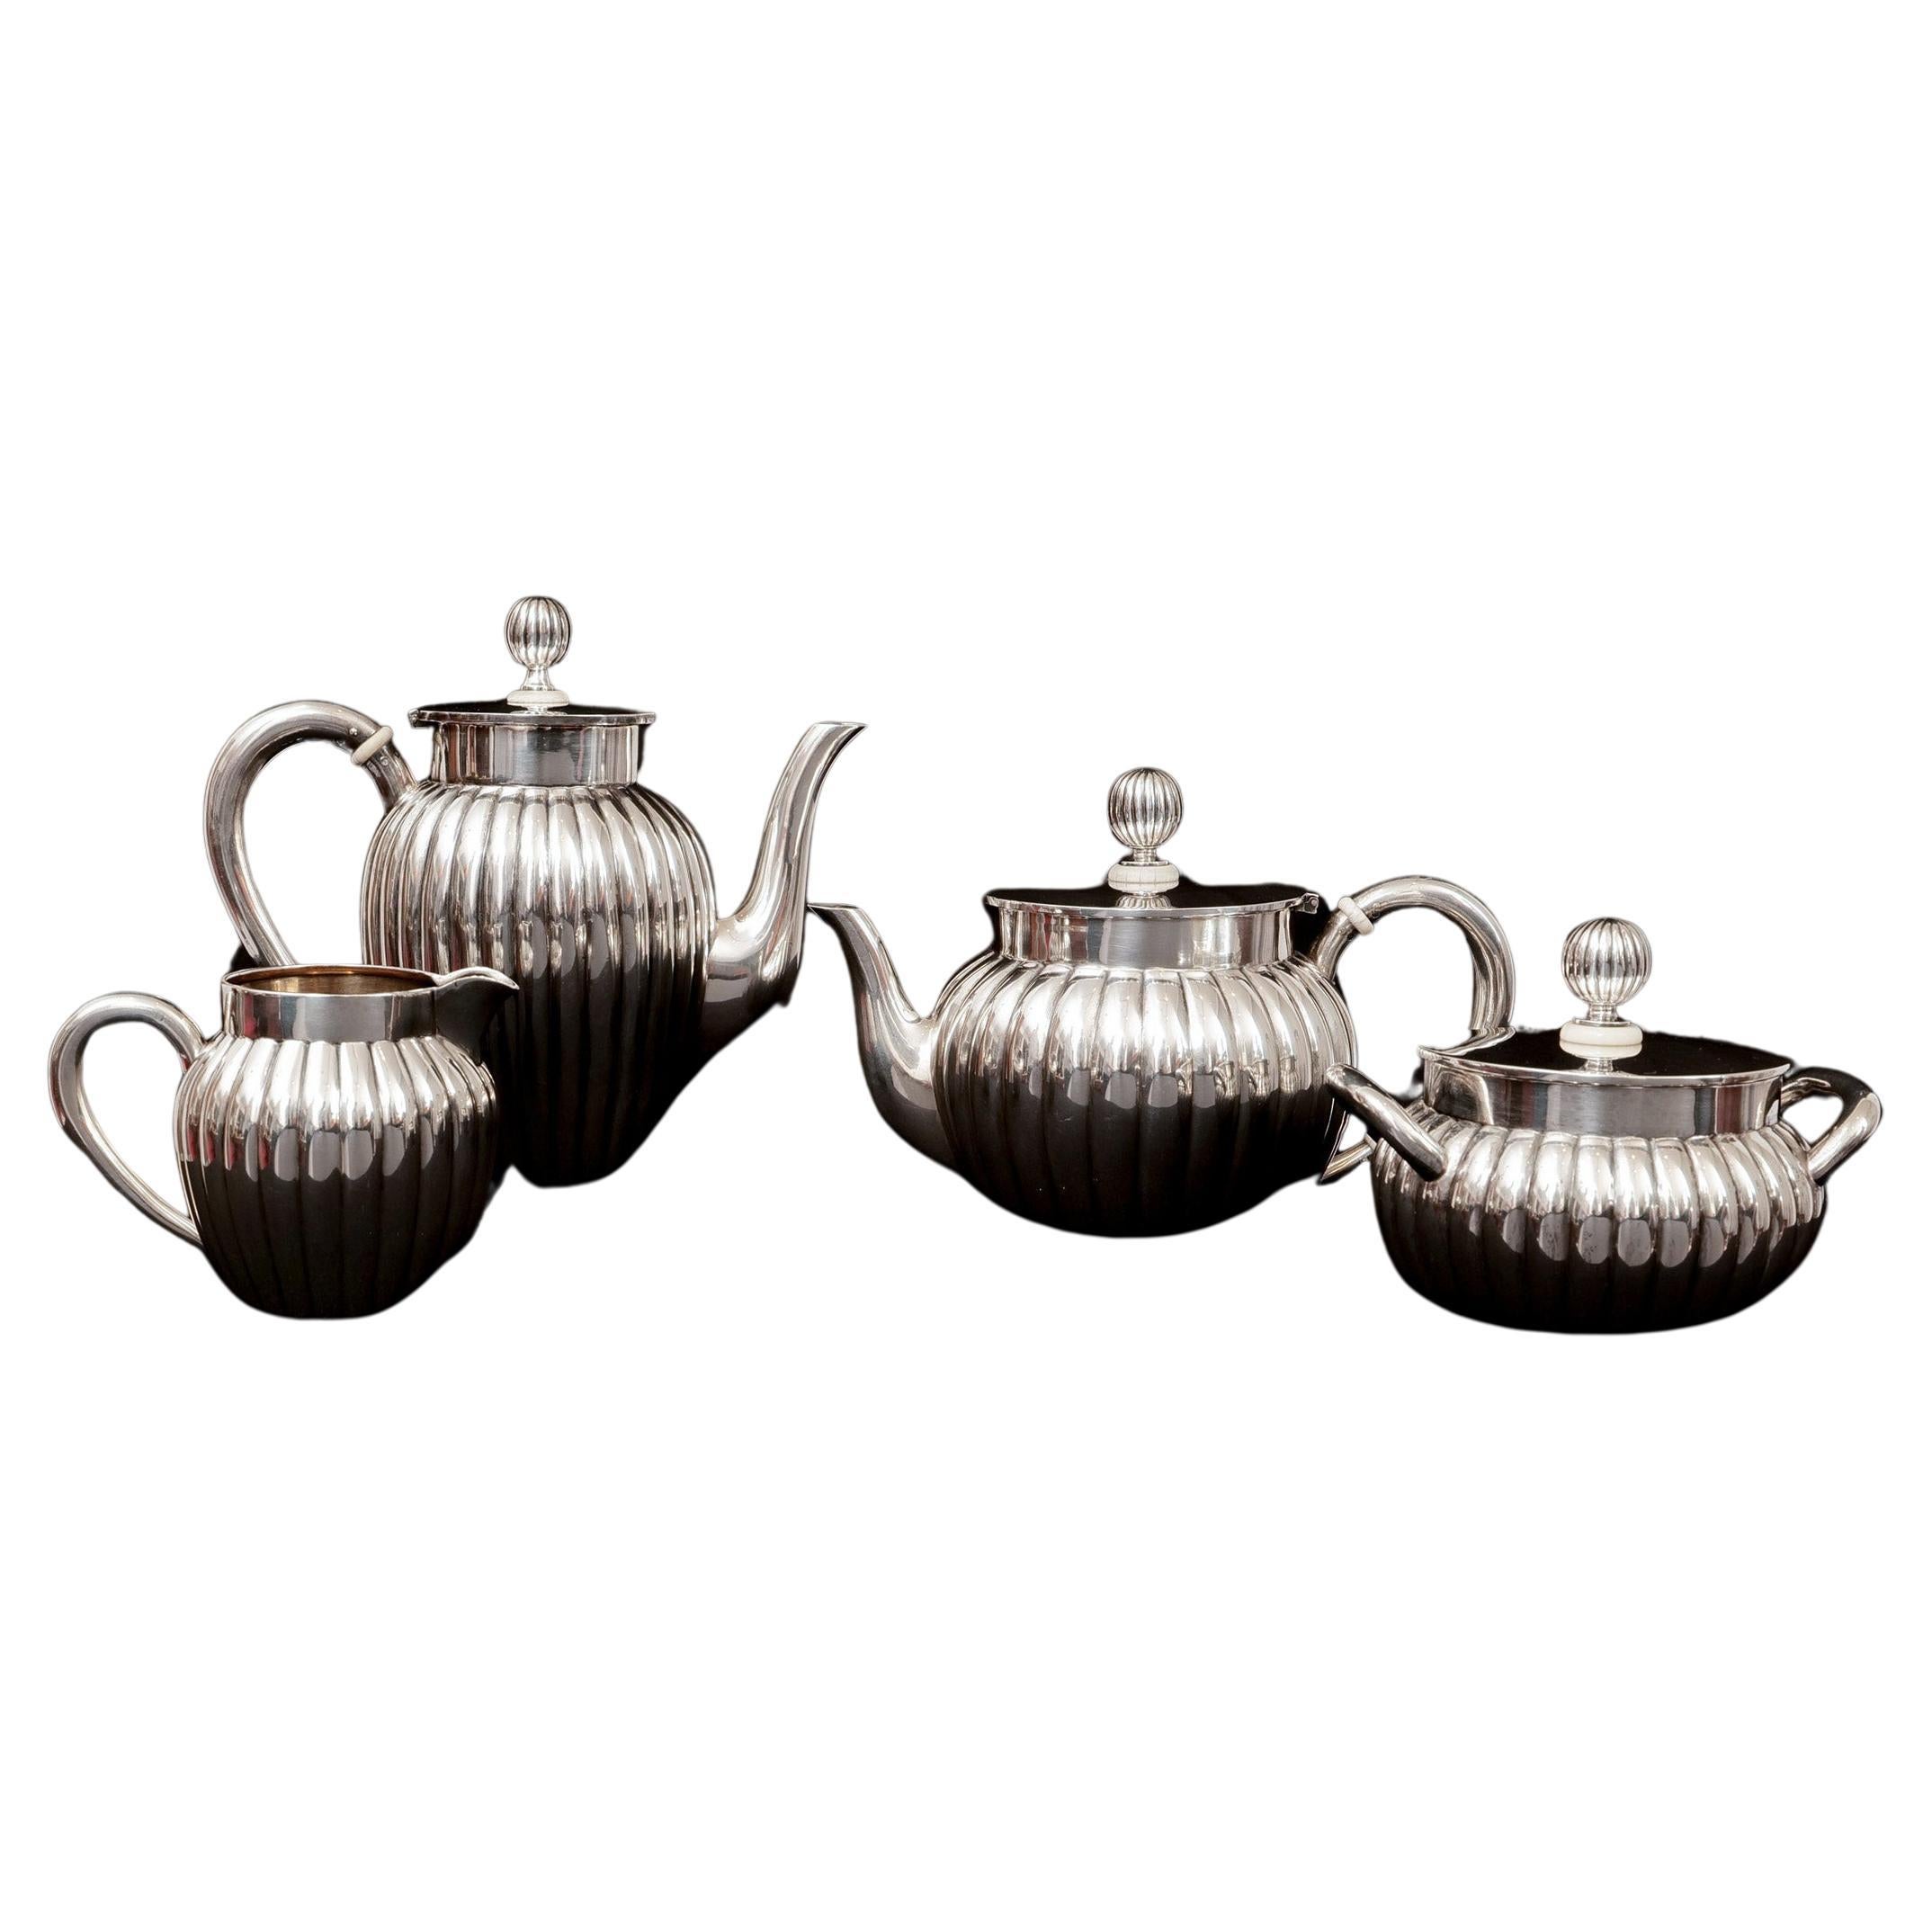 Tea core, set of tea and mocha pot, milk and sugar, Grachev brothers St. Petersburg, court jewelers of the tsar, date of origin 1899 - 1908, silver, total weight 1.215 grams, hallmarks master mark 